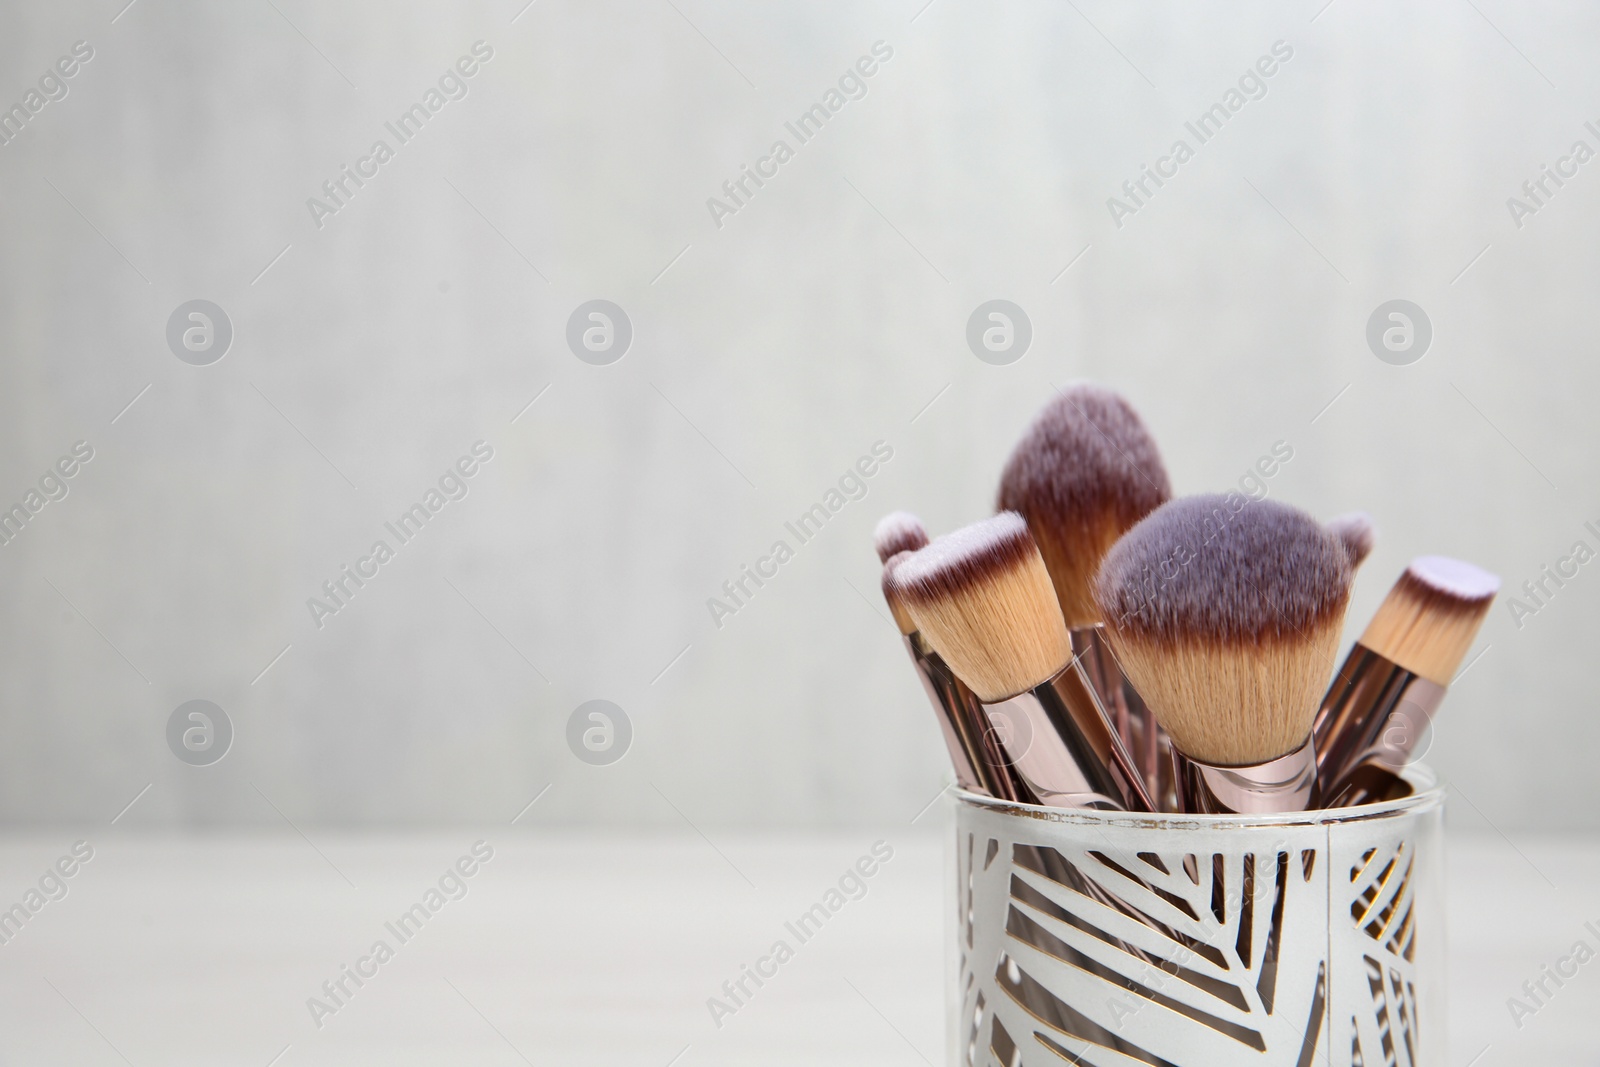 Photo of Organizer with professional makeup brushes against light background. Space for text